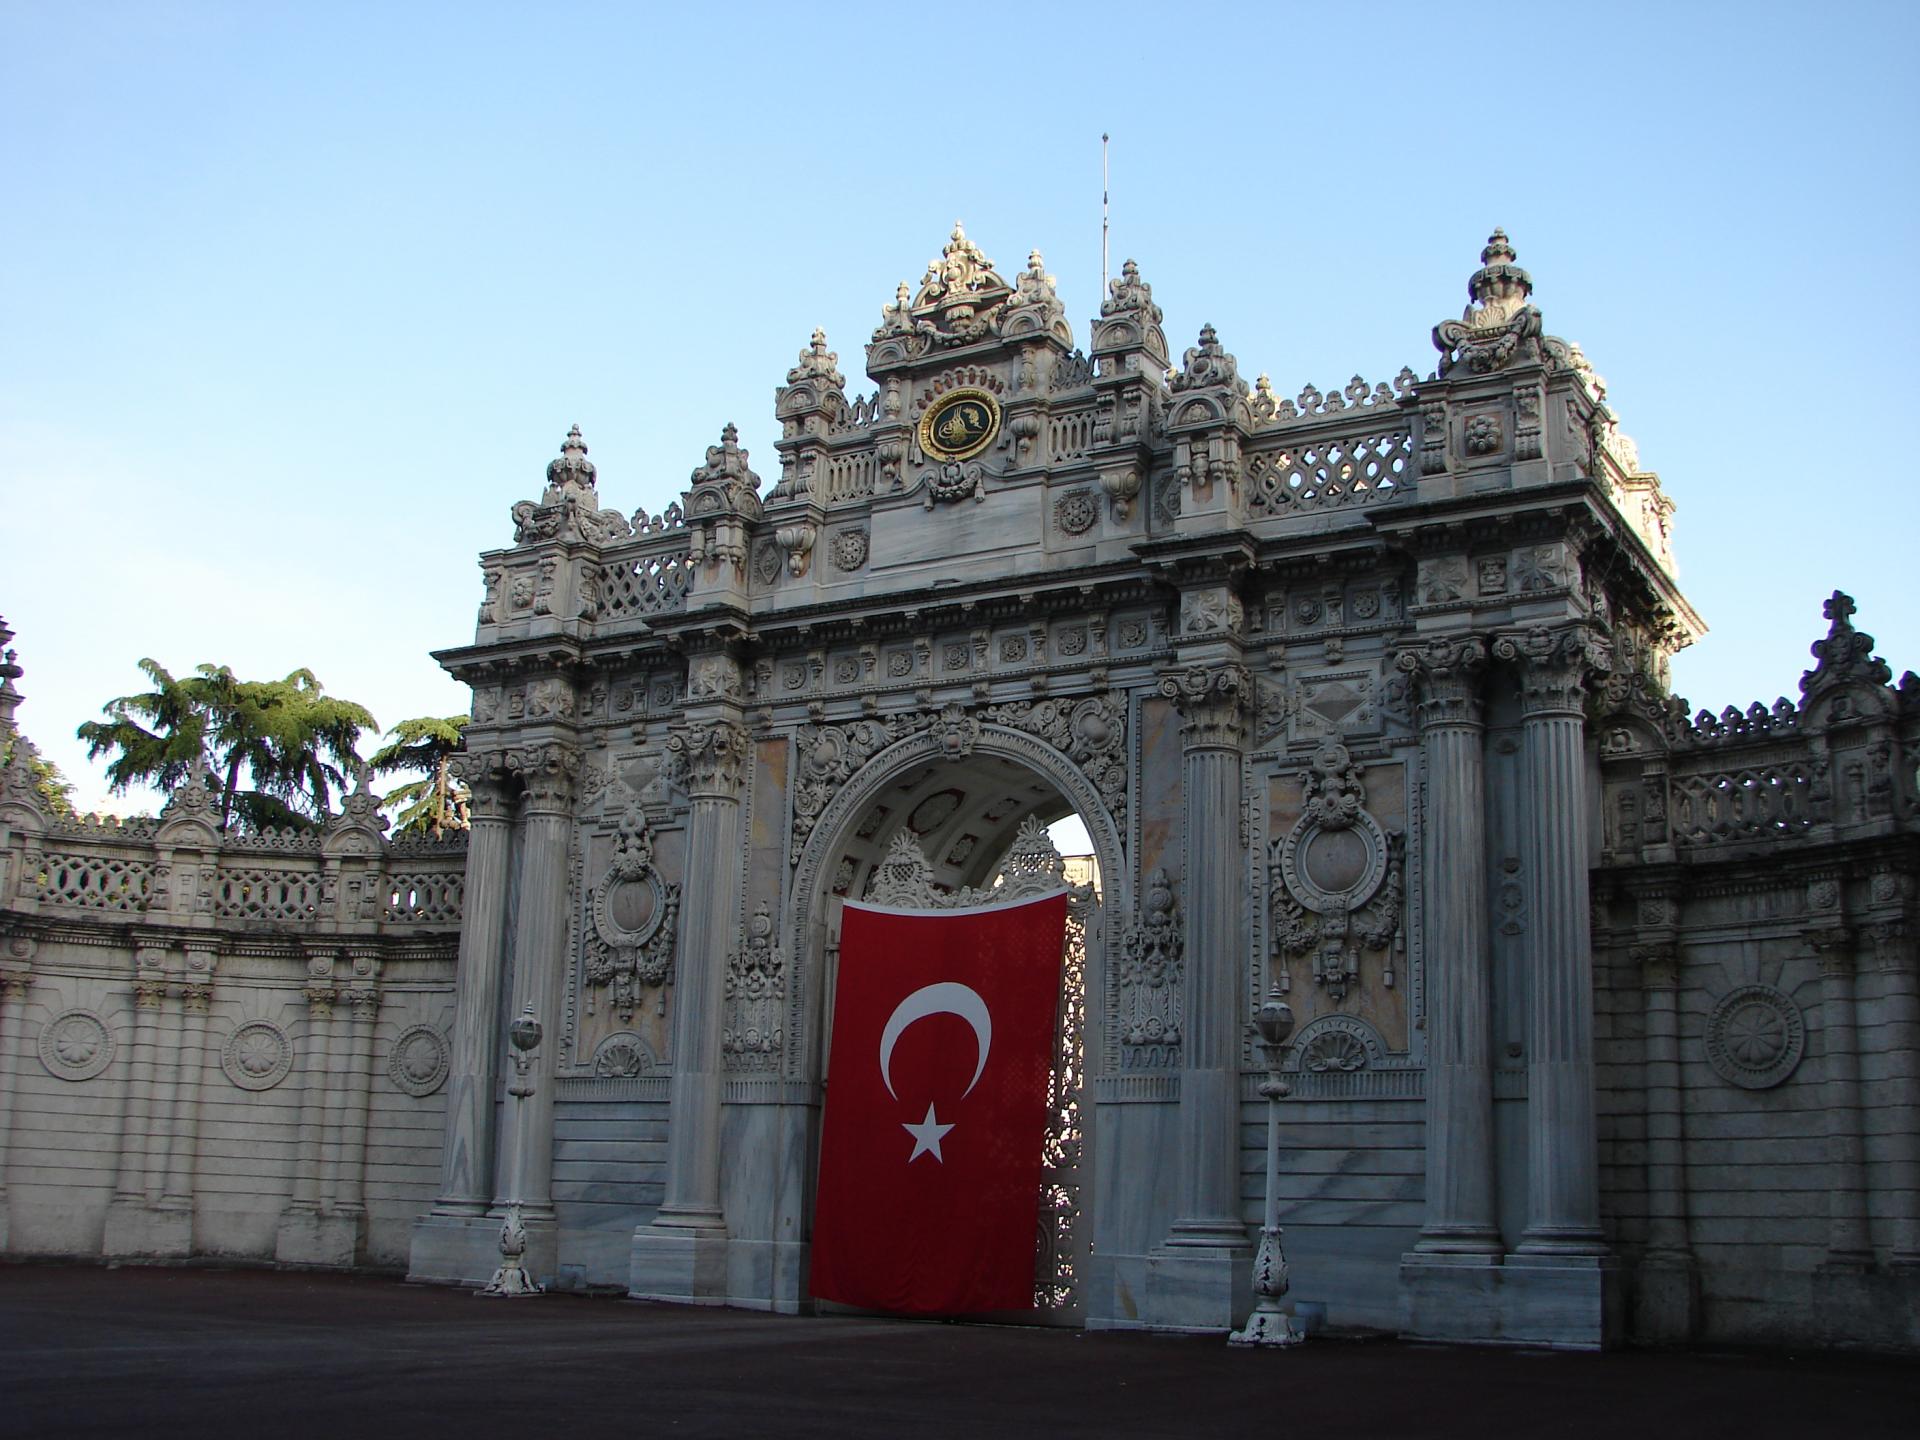 One day in Istanbul